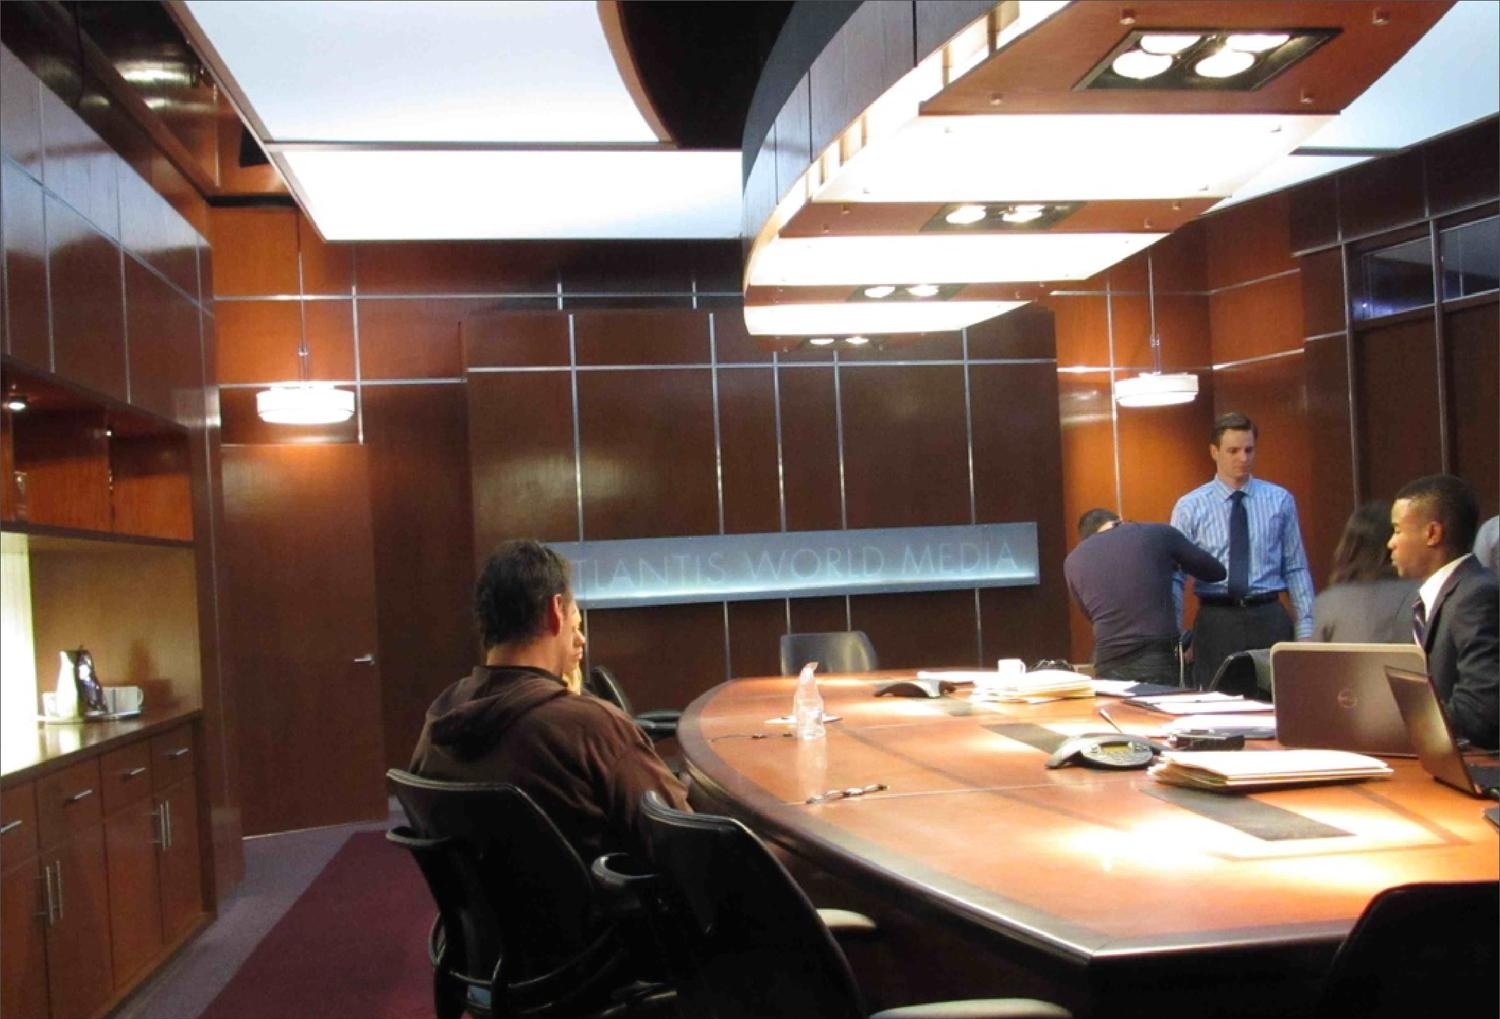 The Newsroom Deposition Conference Room set